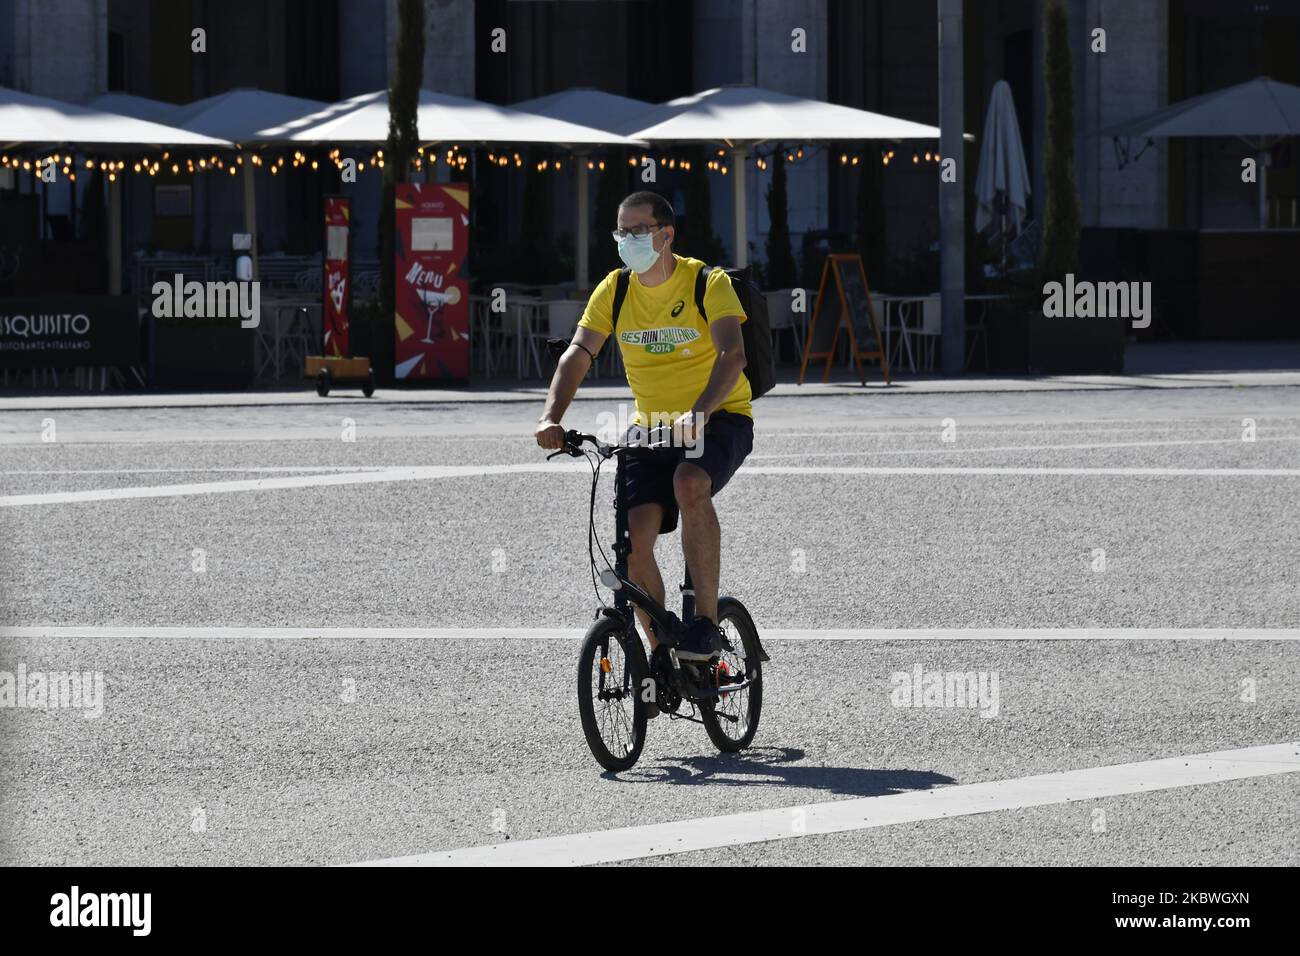 A person wearing a protective mask rides a bicycle through Praça de Comércio, Lisbon. On July 31st, 2020 in Lisbon, Portugal. Health Minister Marta Temido reported that there are 12,864 active cases of COVID-19 disease in Portugal, including outbreak-related infections. In total there are 194 active outbreaks in the country: 47 in the North region, 12 in the Centre, 106 in Lisbon and Tagus Valley, 14 in the Alentejo and 15 in the Algarve region. The outbreaks are considered active even if several days have passed since the last confirmed case. 'We only consider an outbreak to be extinct when 2 Stock Photo